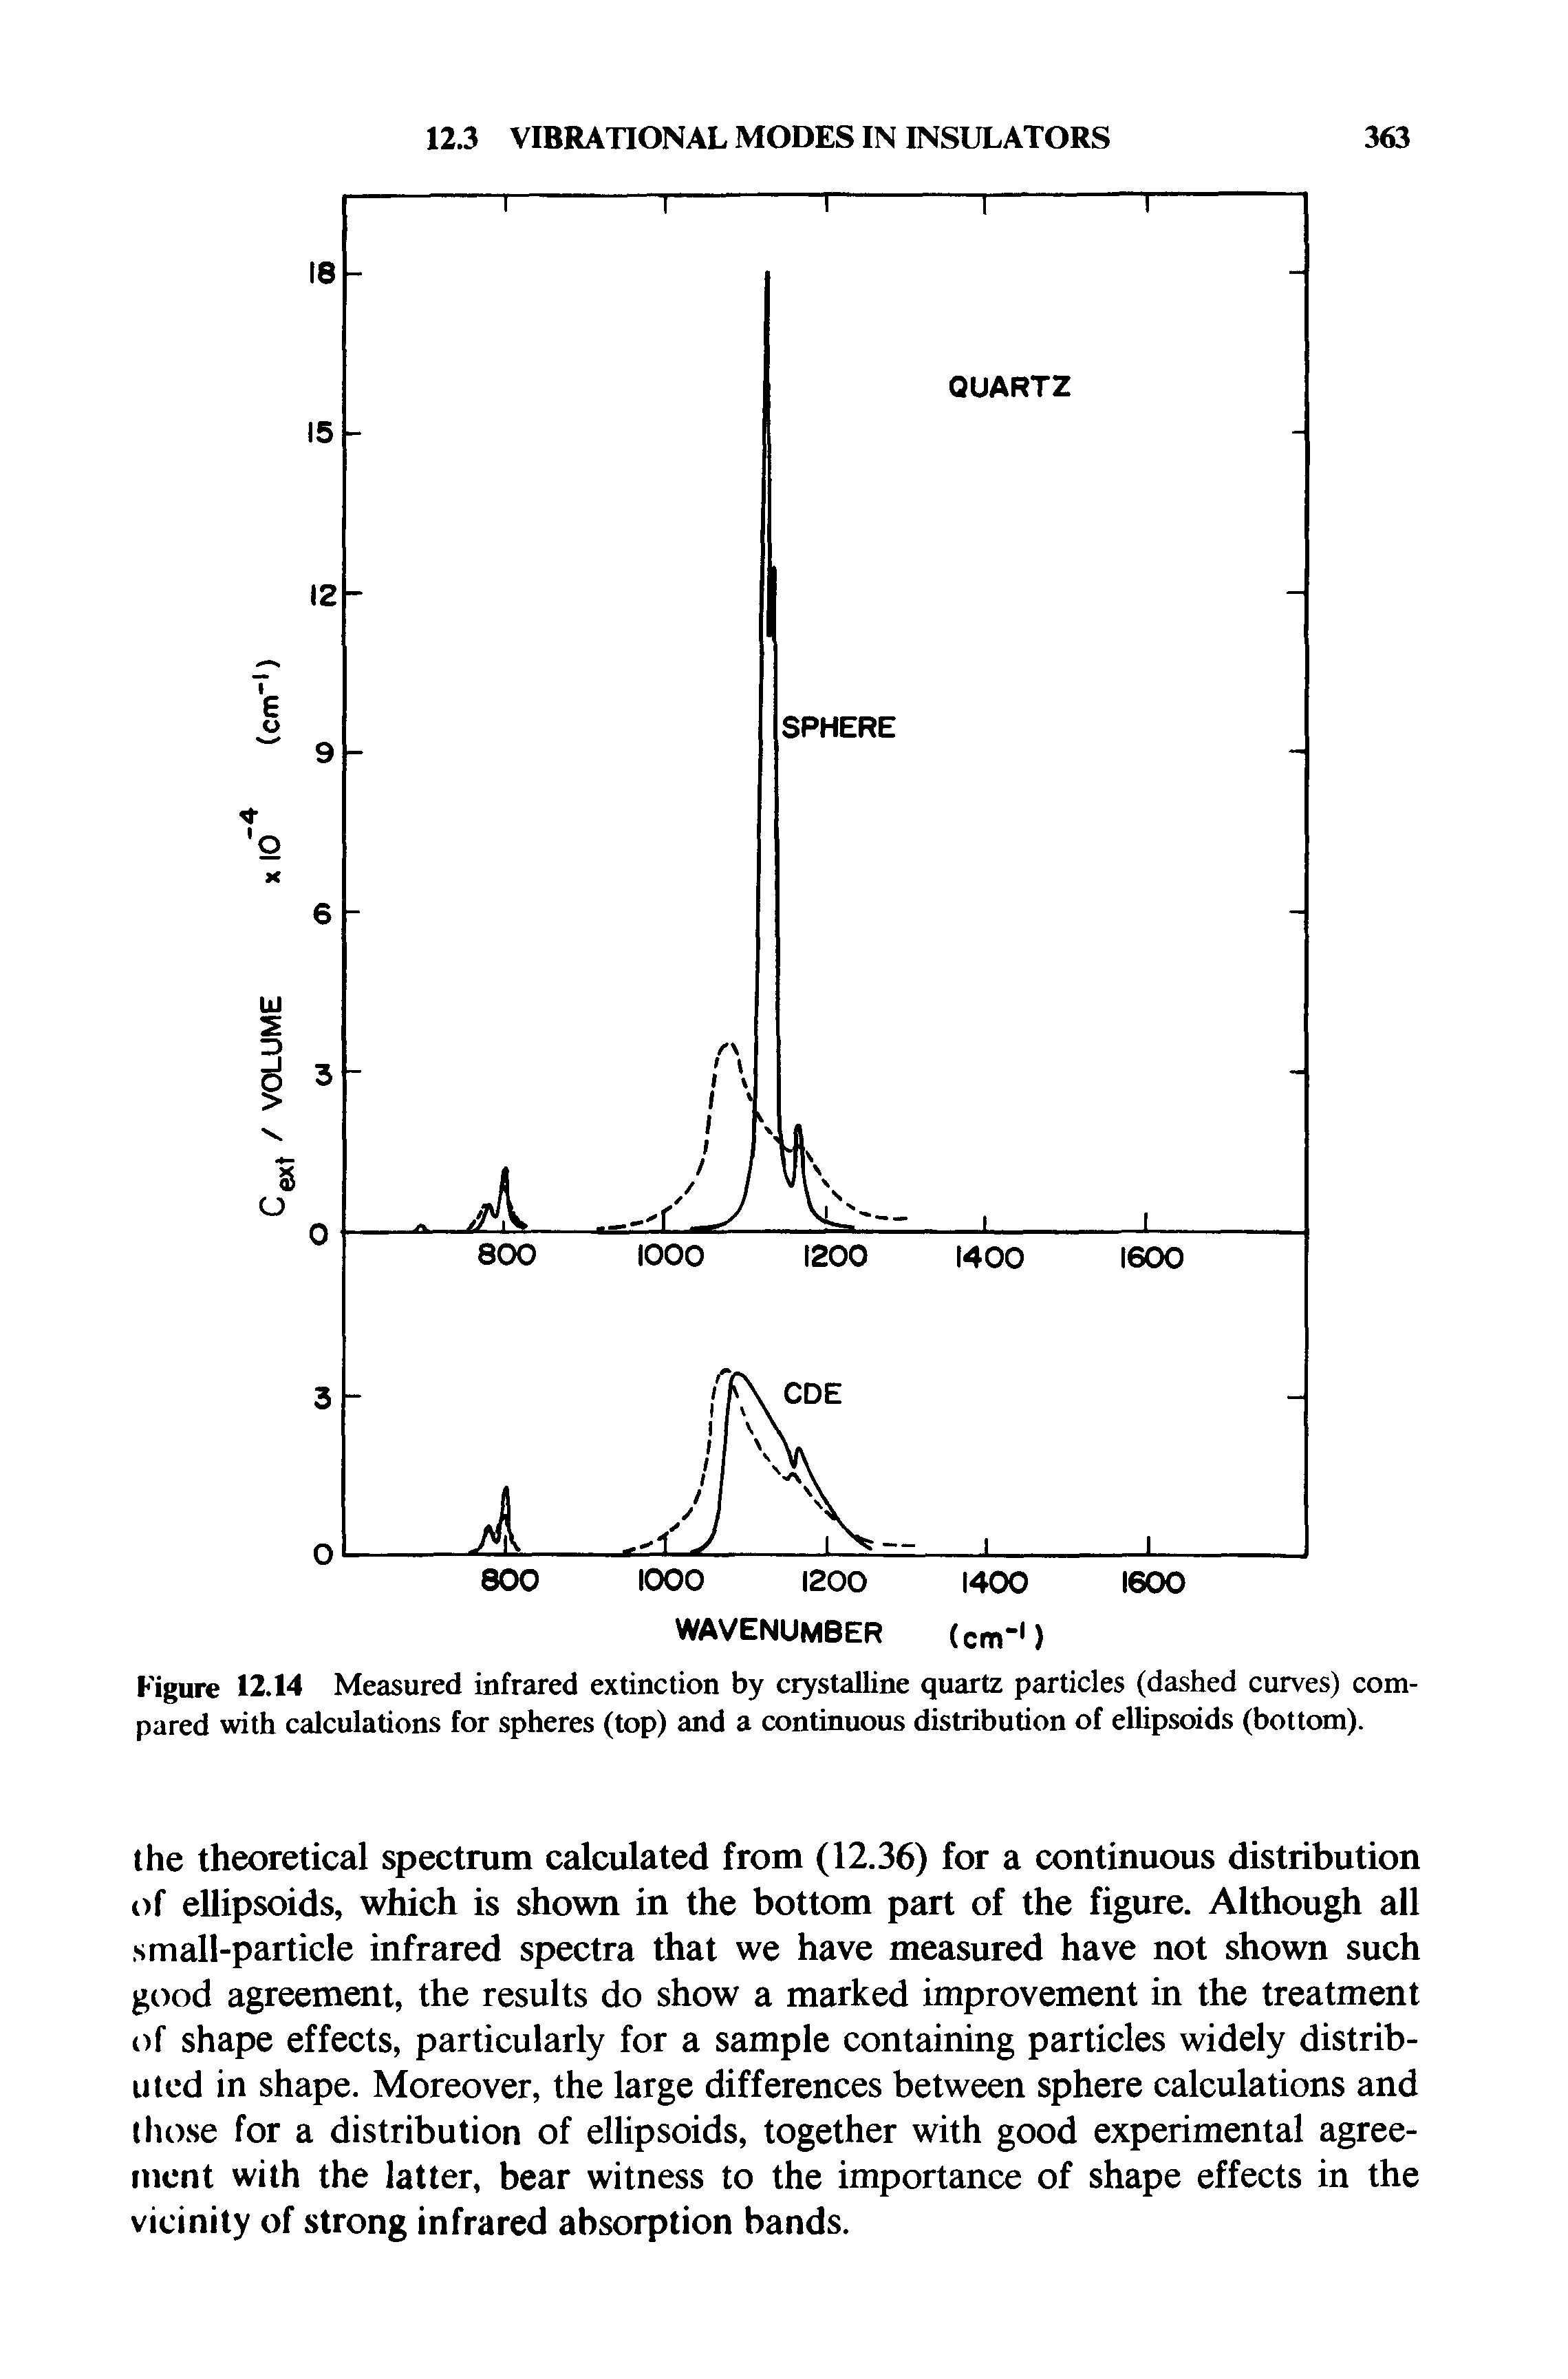 Figure 12.14 Measured infrared extinction by crystalline quartz particles (dashed curves) compared with calculations for spheres (top) and a continuous distribution of ellipsoids (bottom).